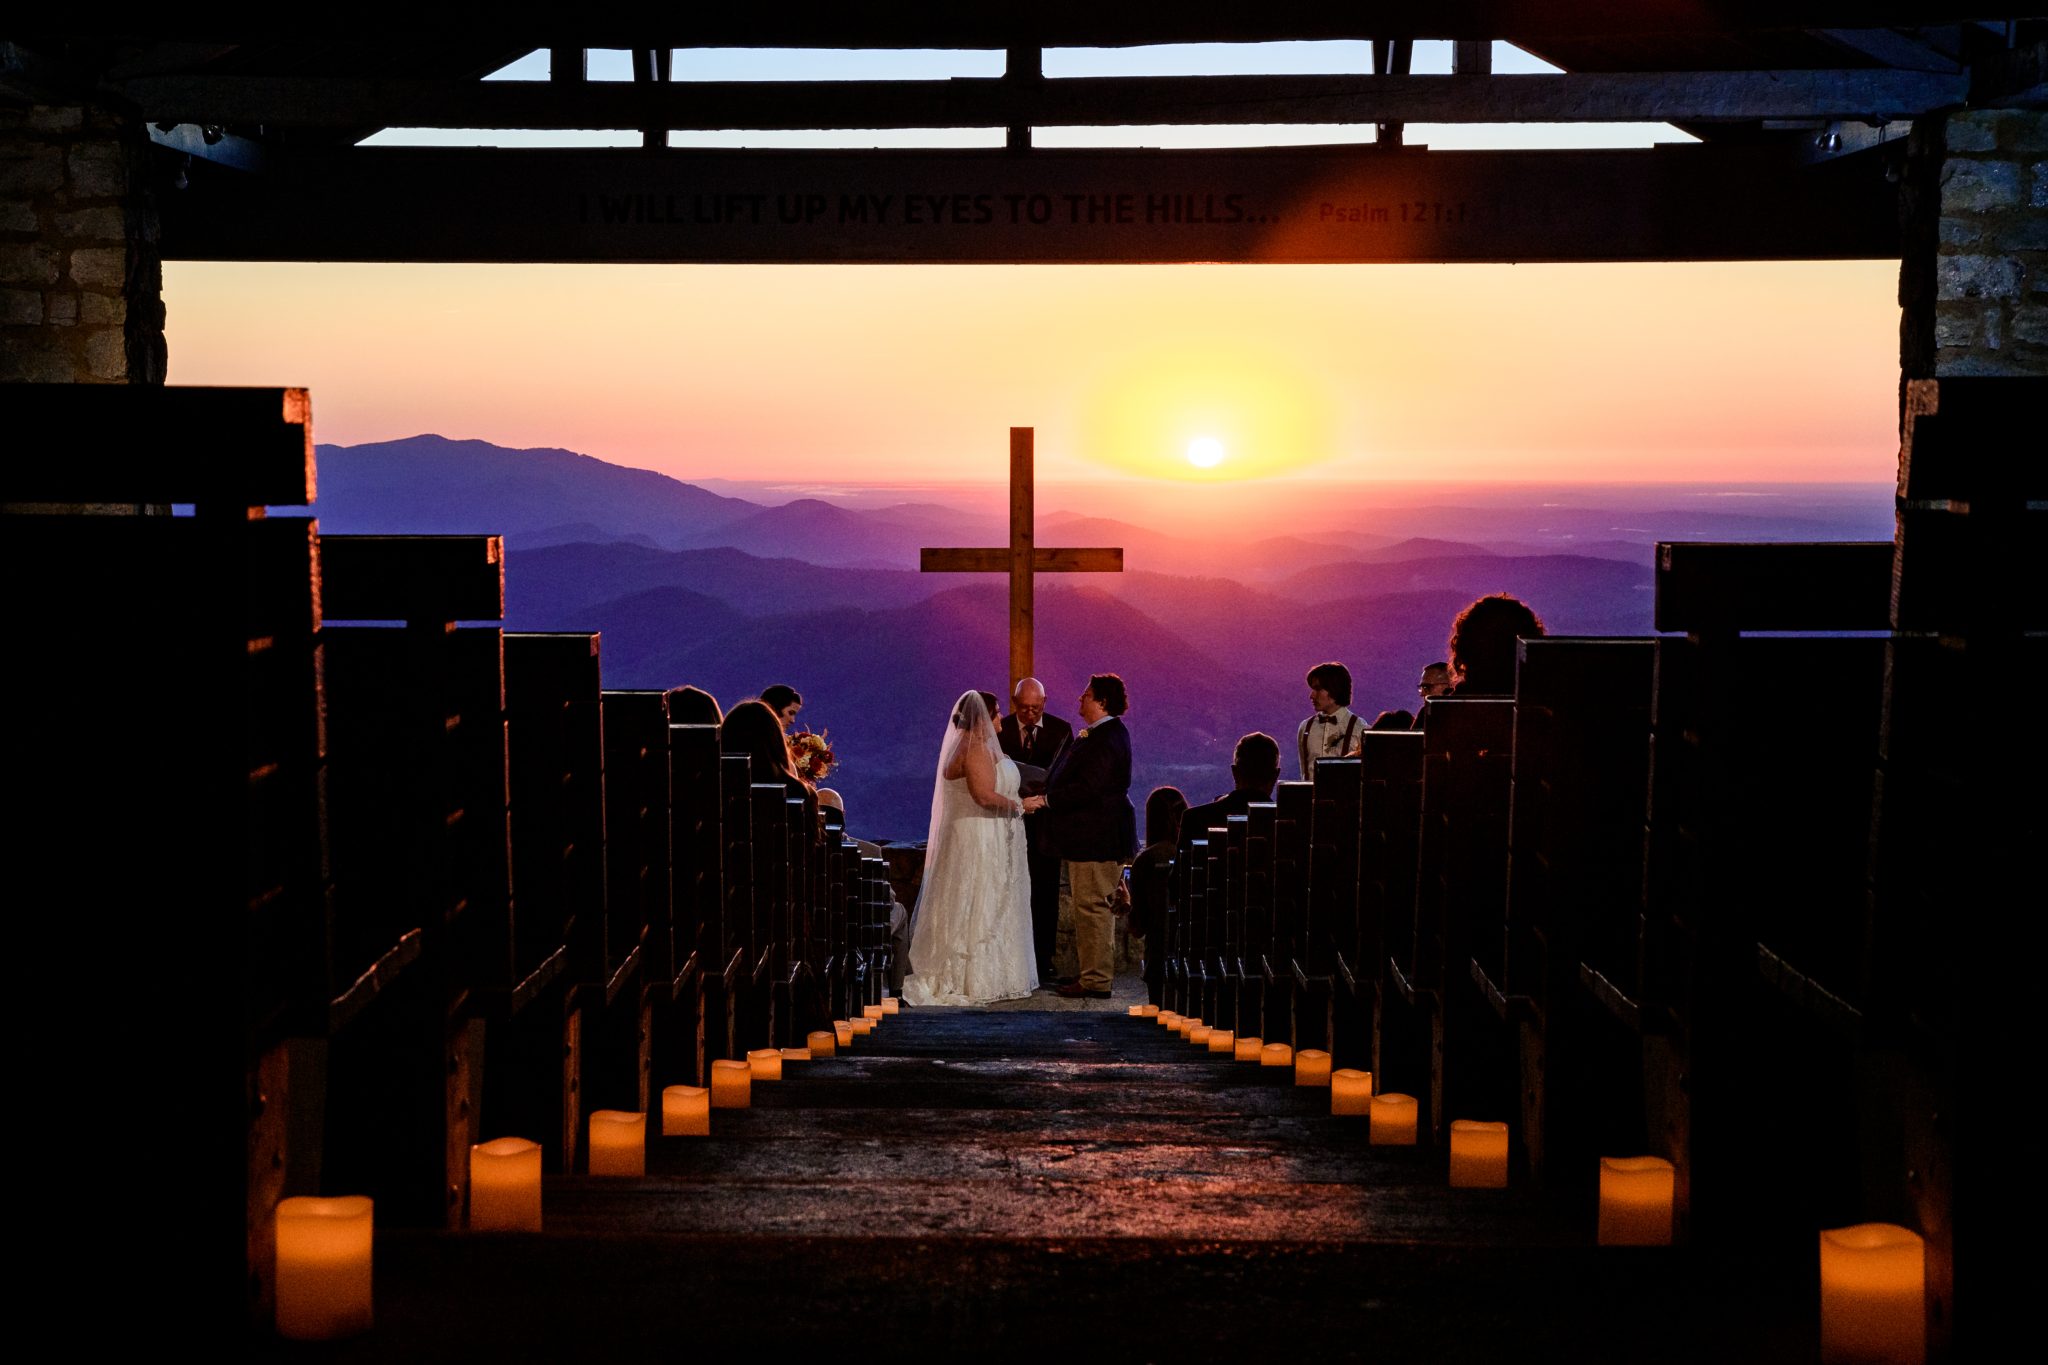 Asheville wedding photographer Michael Freas captures a bride and groom standing in front of a cross at sunrise at Pretty Place wedding venue.